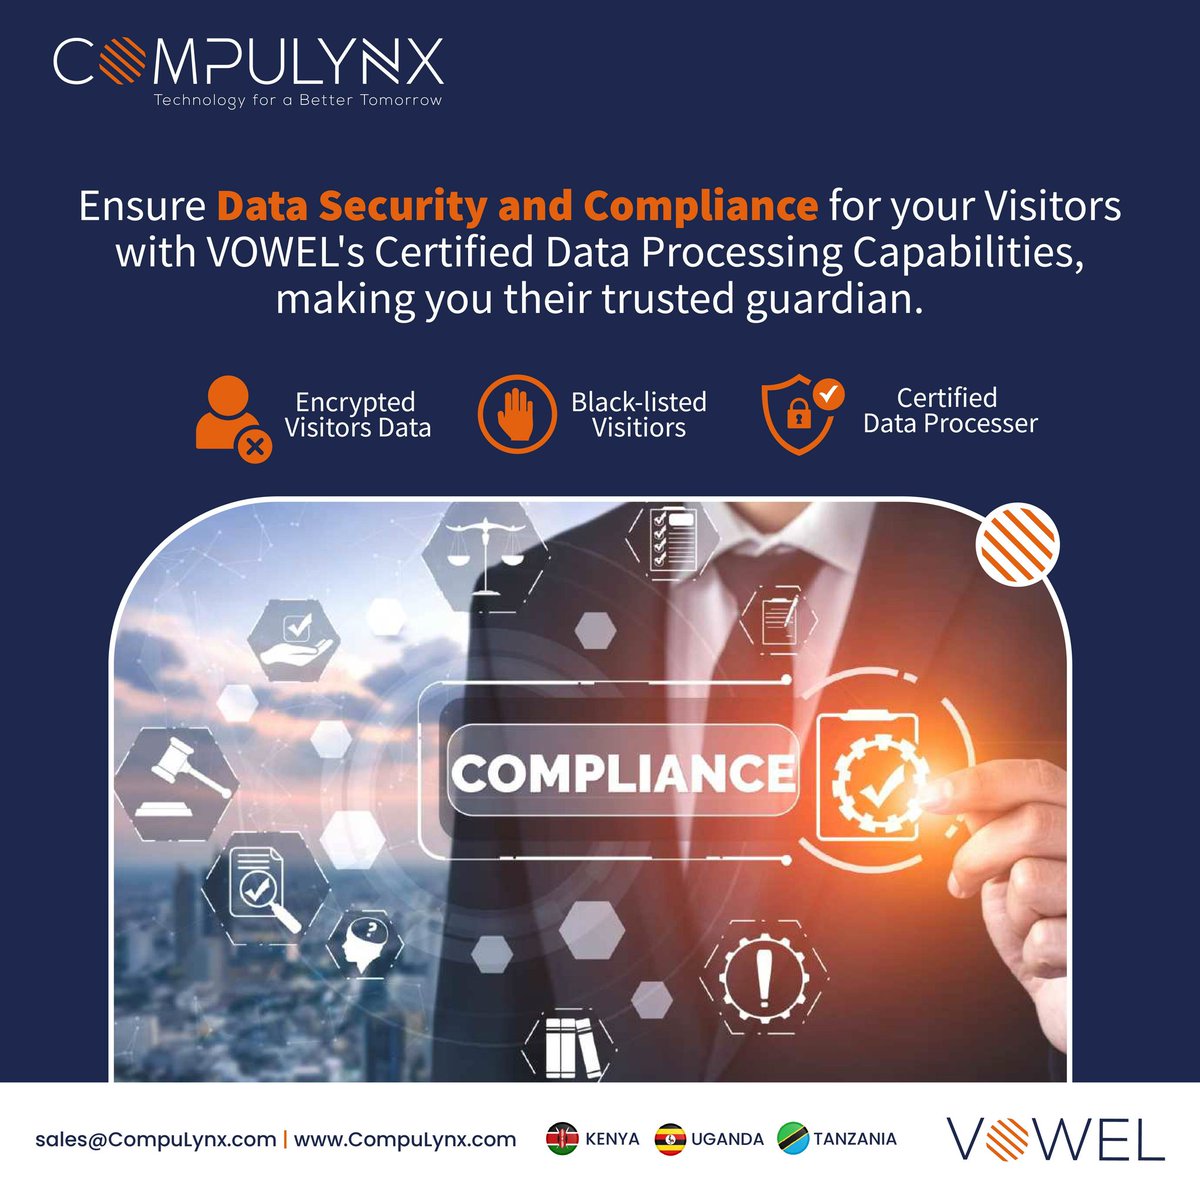 Safeguard your visitor data with confidence using VOWEL's certified data processing capabilities. Be the trusted guardian of your visitors' information while ensuring compliance with regulations.

Learn more bit.ly/3oAu3jY

#VOWEL #VisitorManagementSystem #CompuLynx